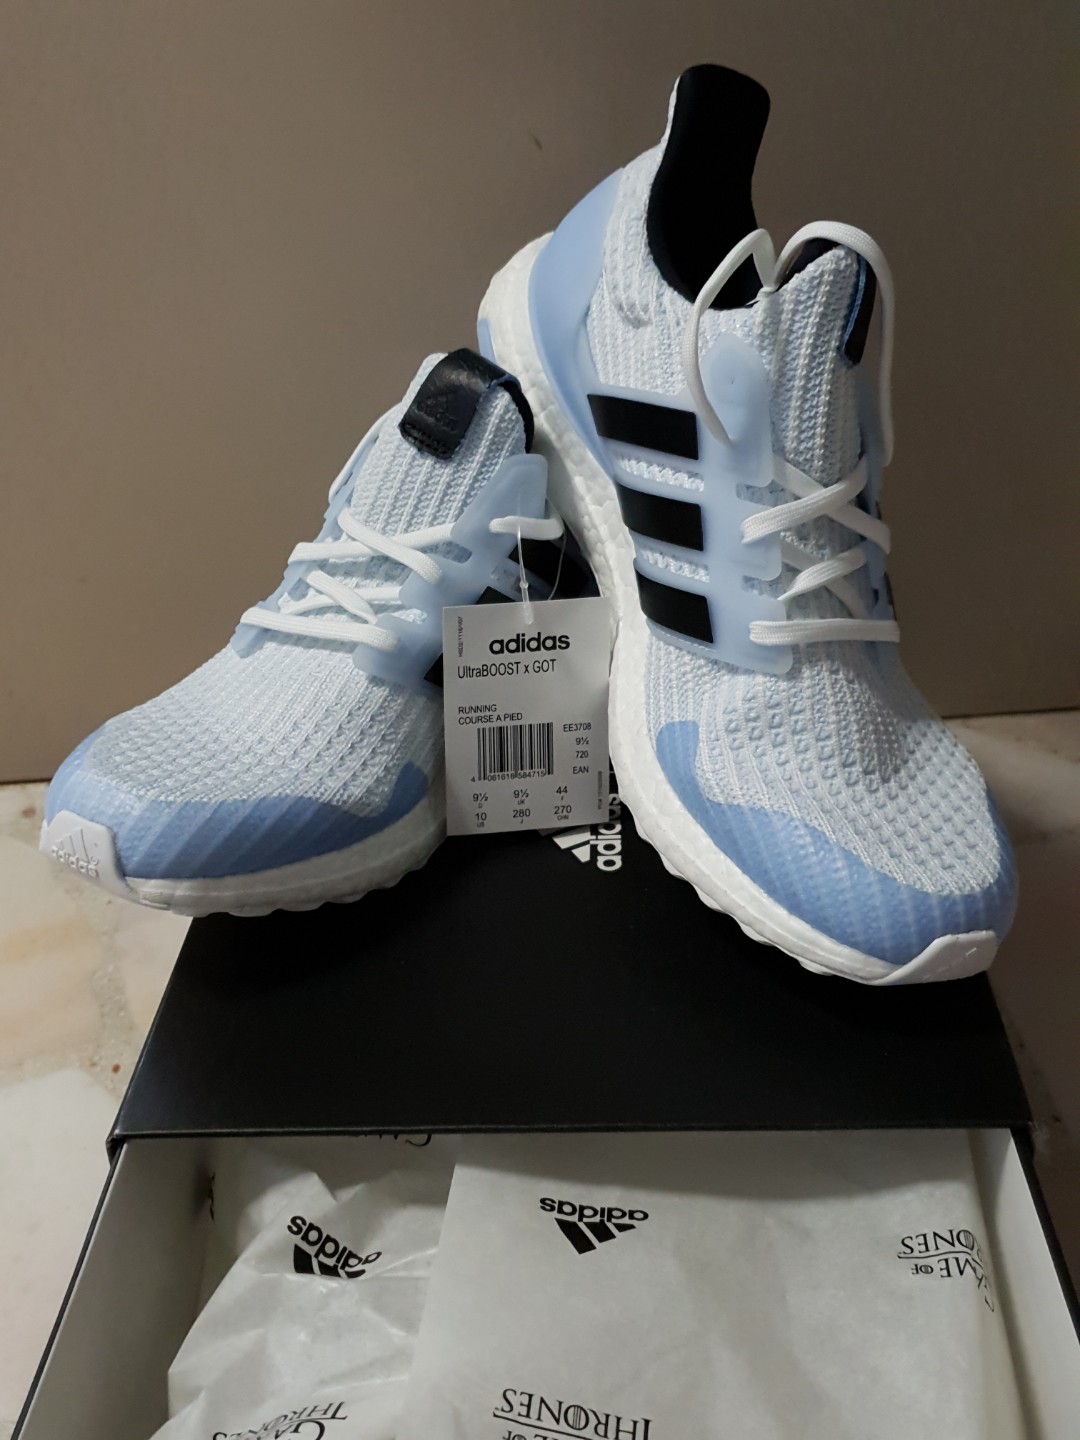 boost white walkers